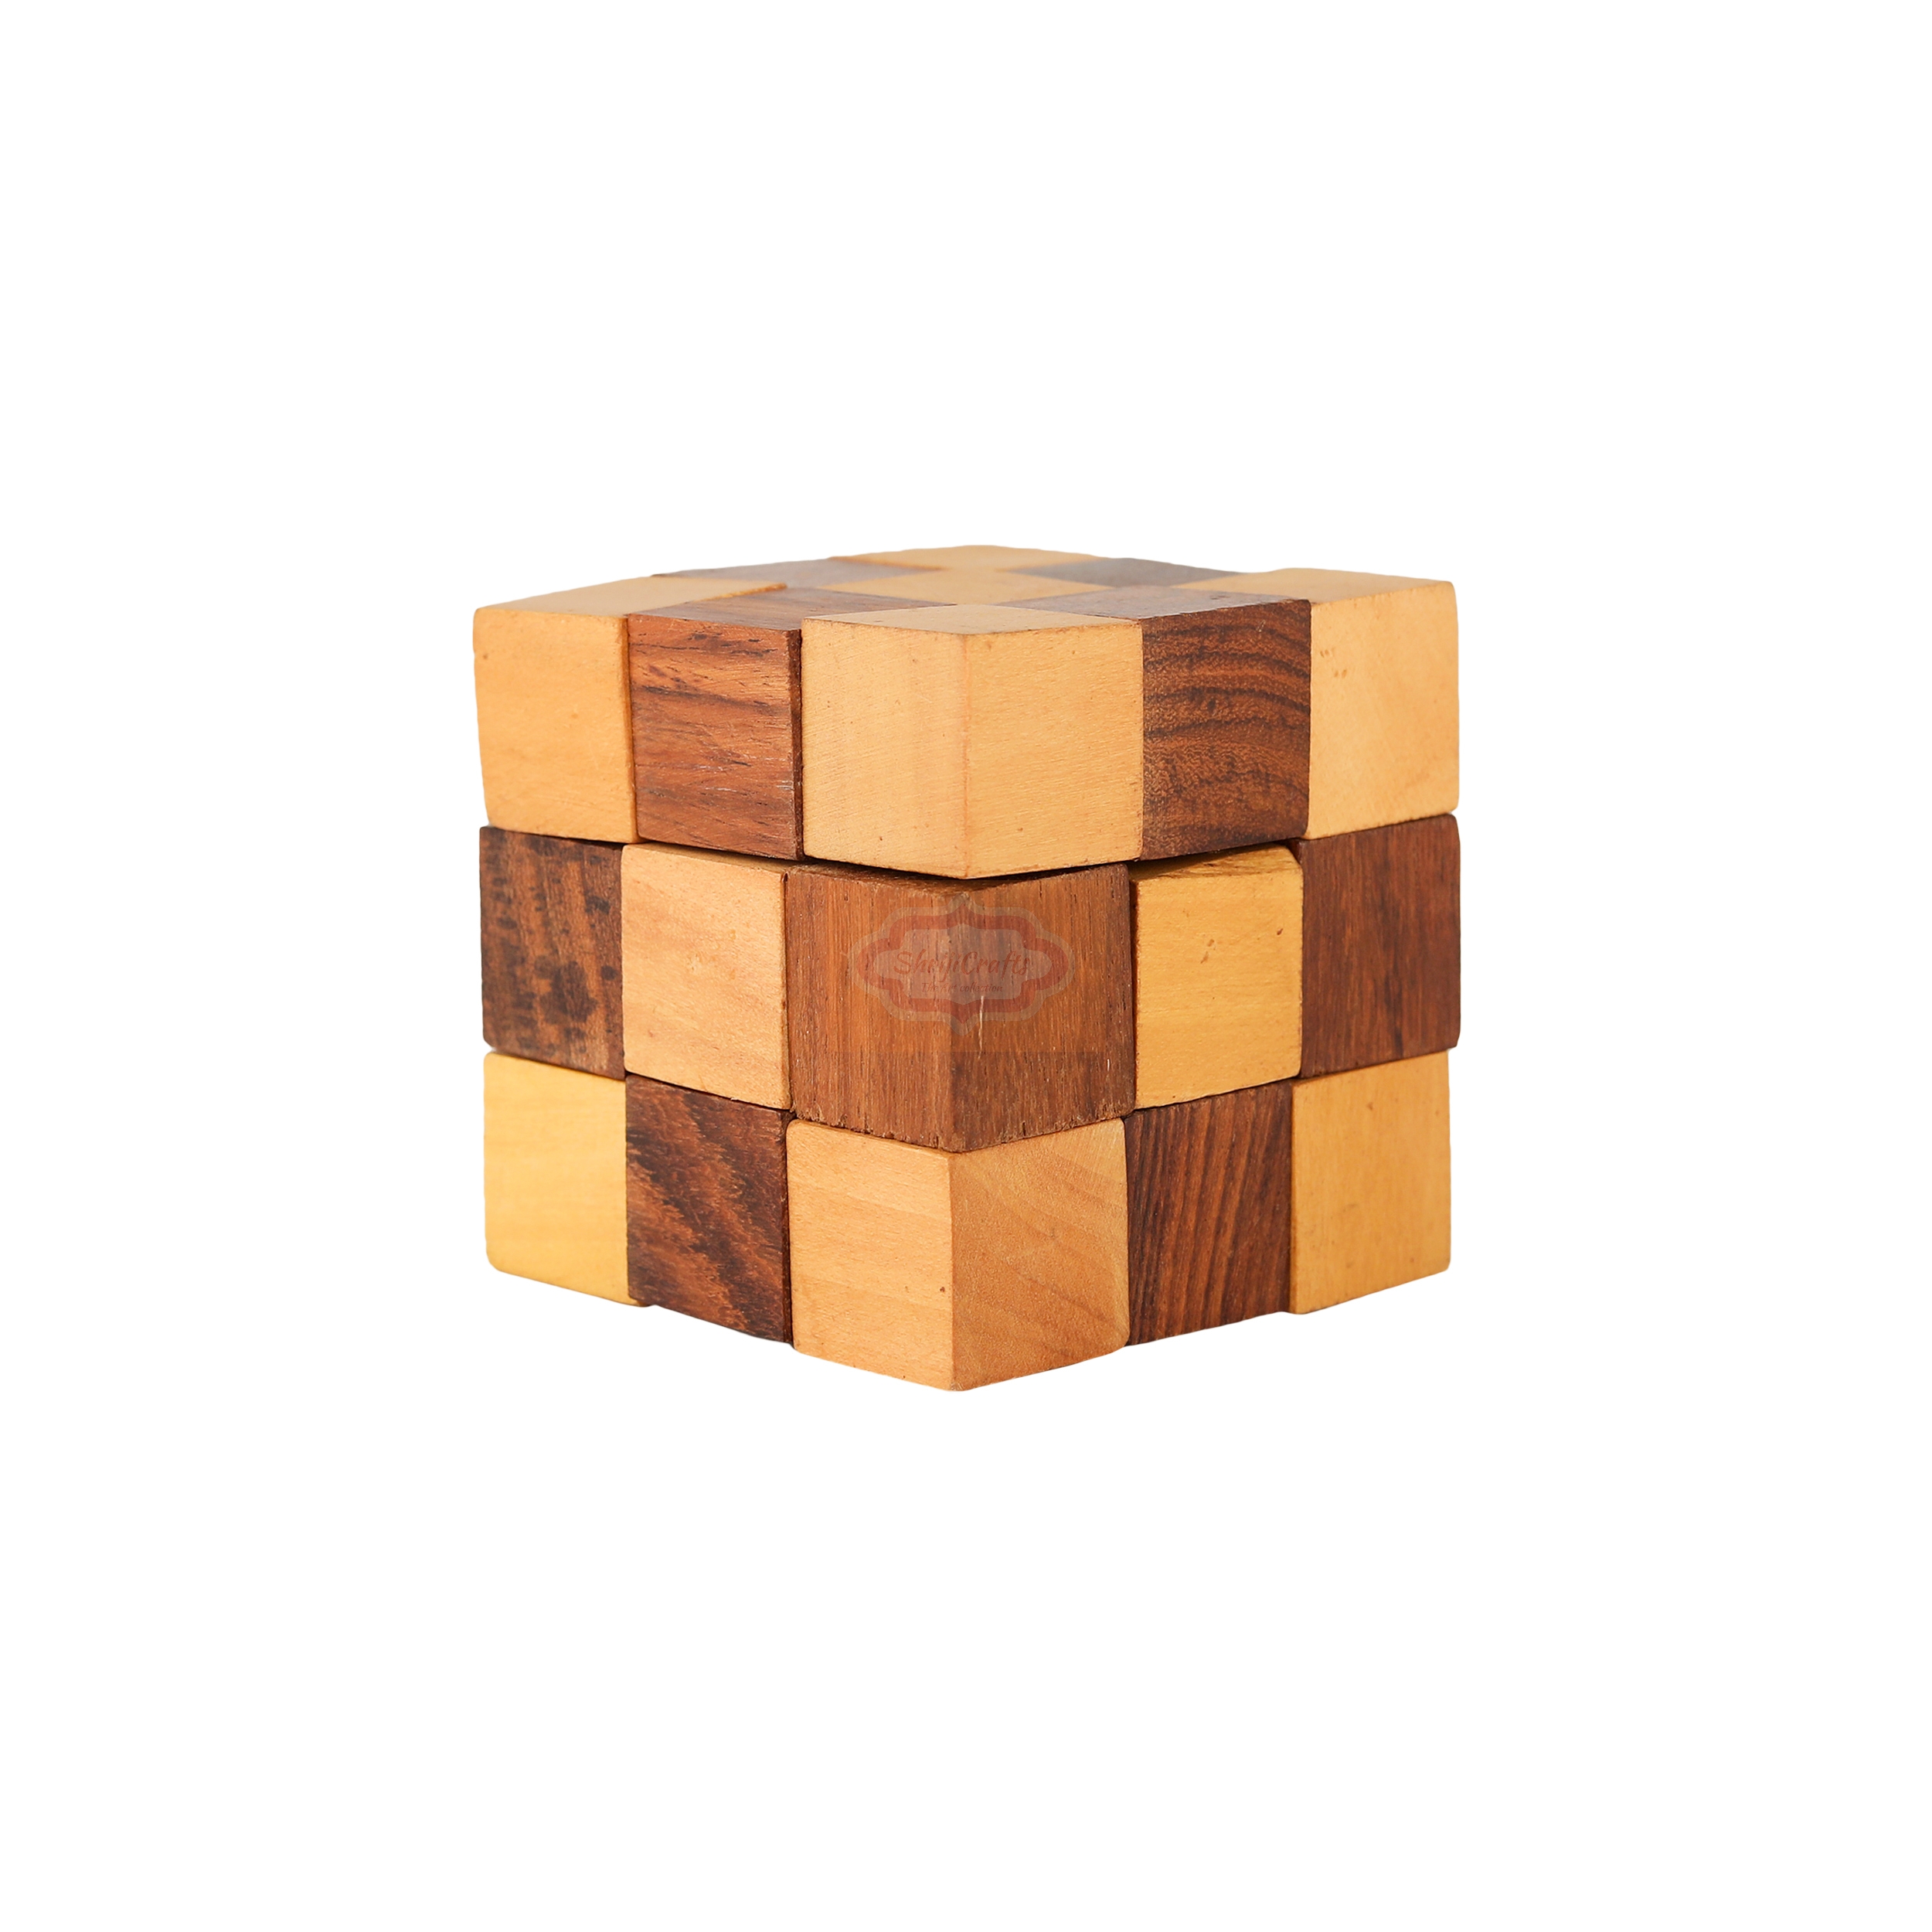 Shrijicrafts | ShrijiCrafts® Wooden IQ Teaser Puzzle Adult Snake Cube Handmade India Unique Gifts for Kids and Adult (2.5x2.5x2.5-inch) 1